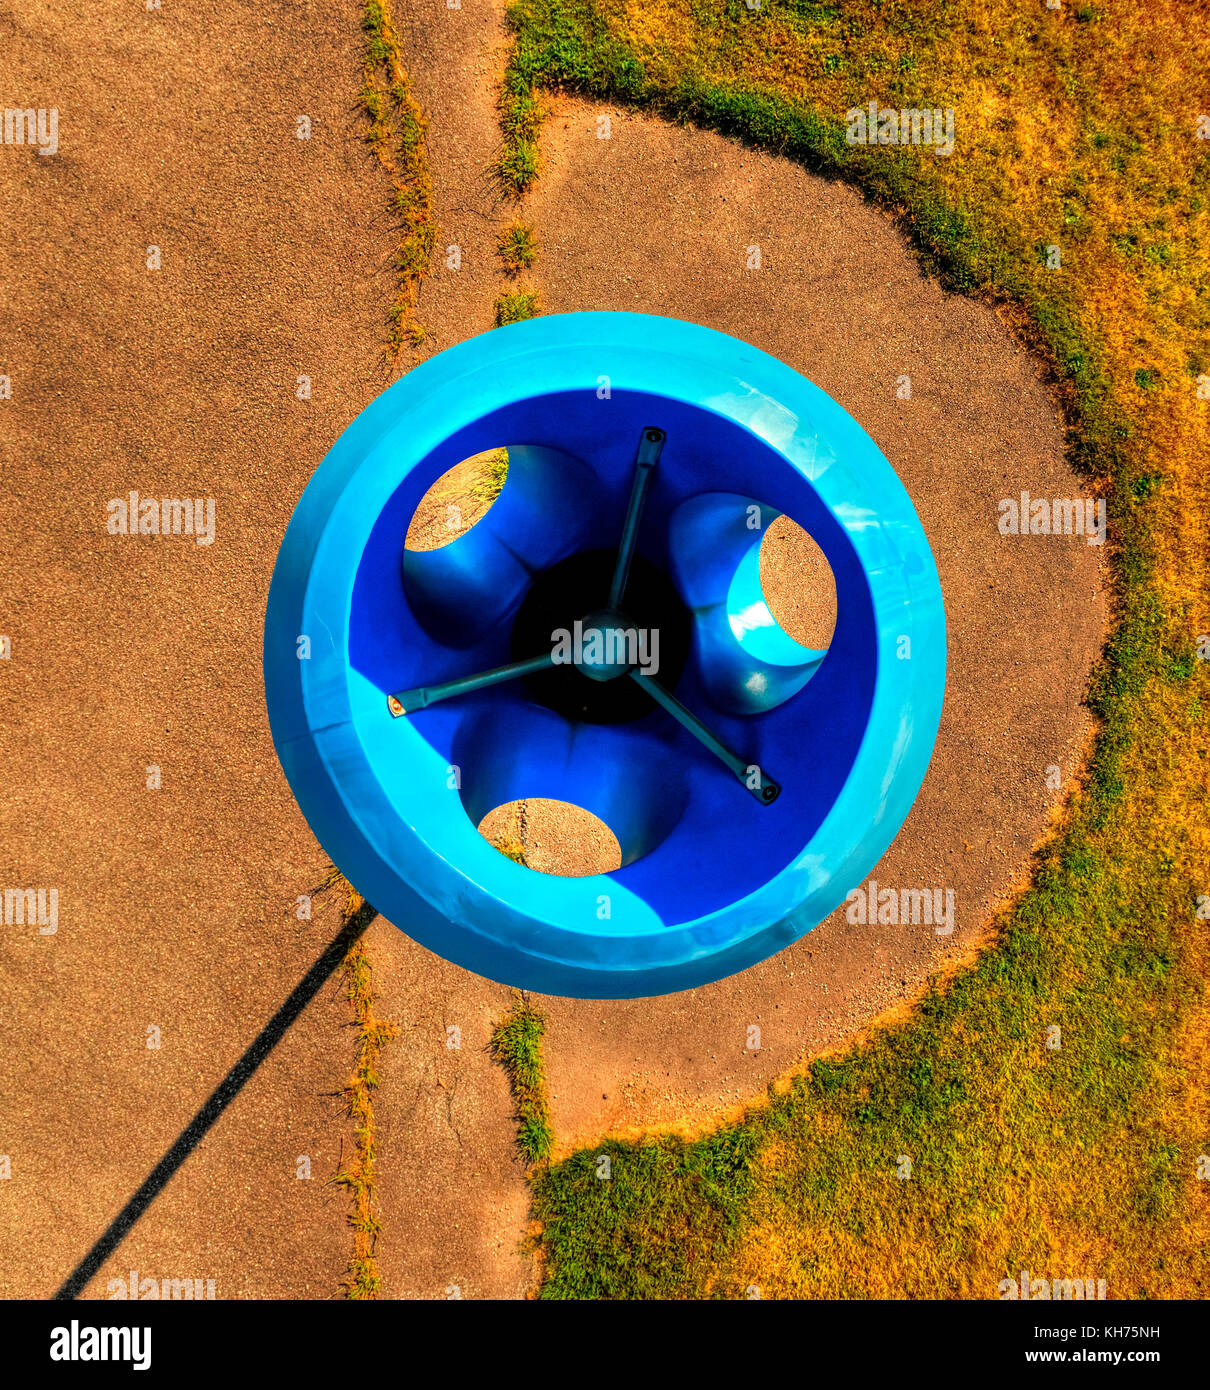 Pole aerial High Dynamic Range (HDR) image of a blue funnel ball structure on a playground. Stock Photo